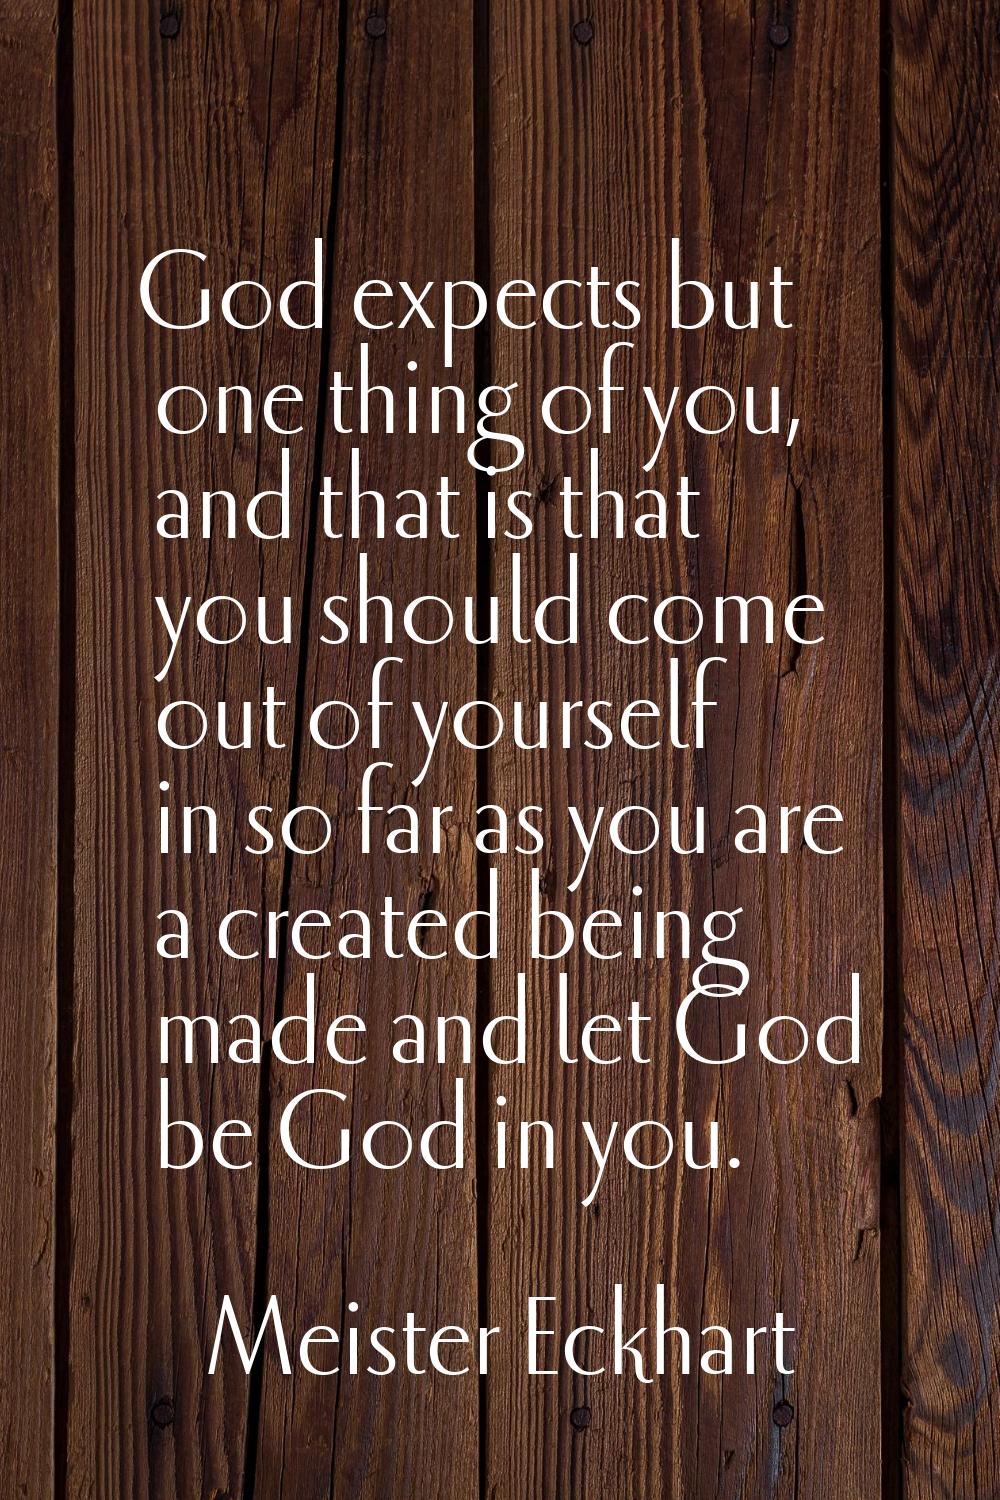 God expects but one thing of you, and that is that you should come out of yourself in so far as you